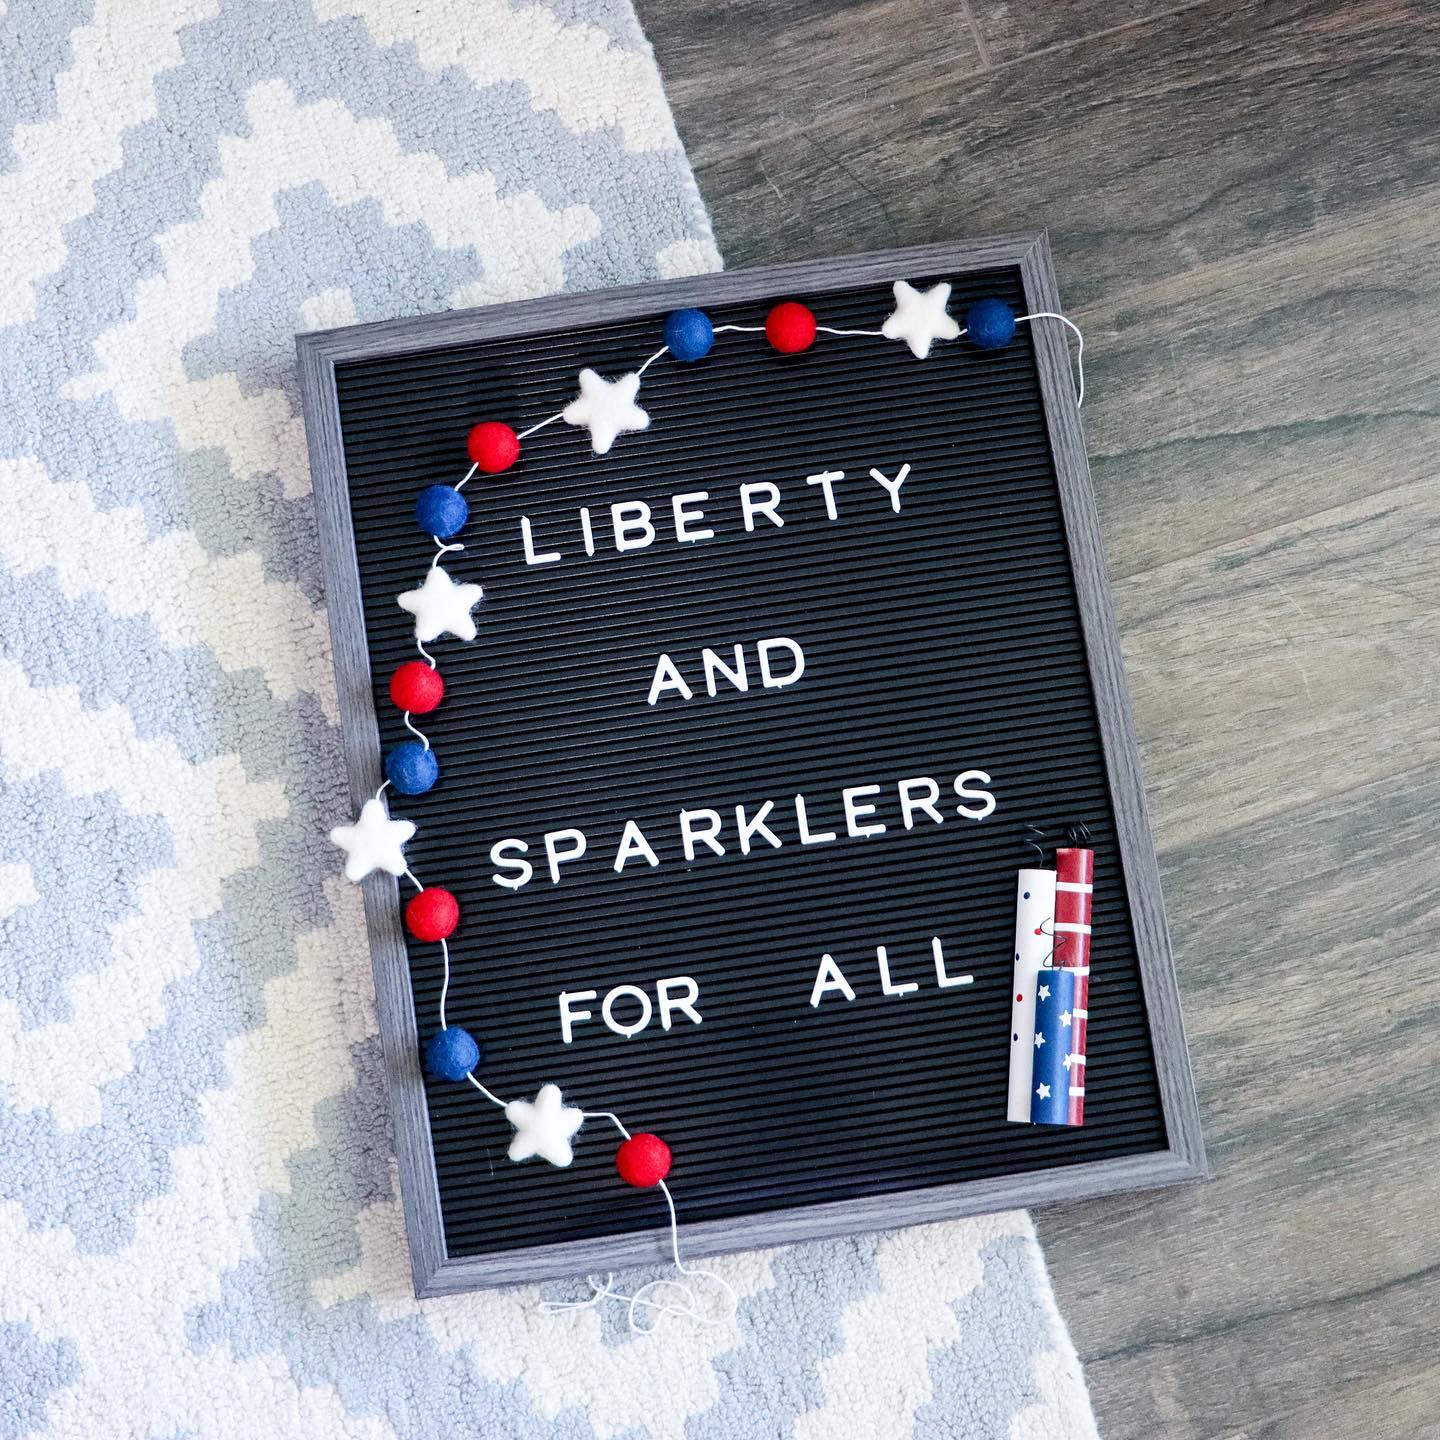 ♥️🤍💙 // Liberty and sparklers for all 🧨

// #letterboard #letterboards #letterboardquotes #fourthofjuly #festive #homedecor